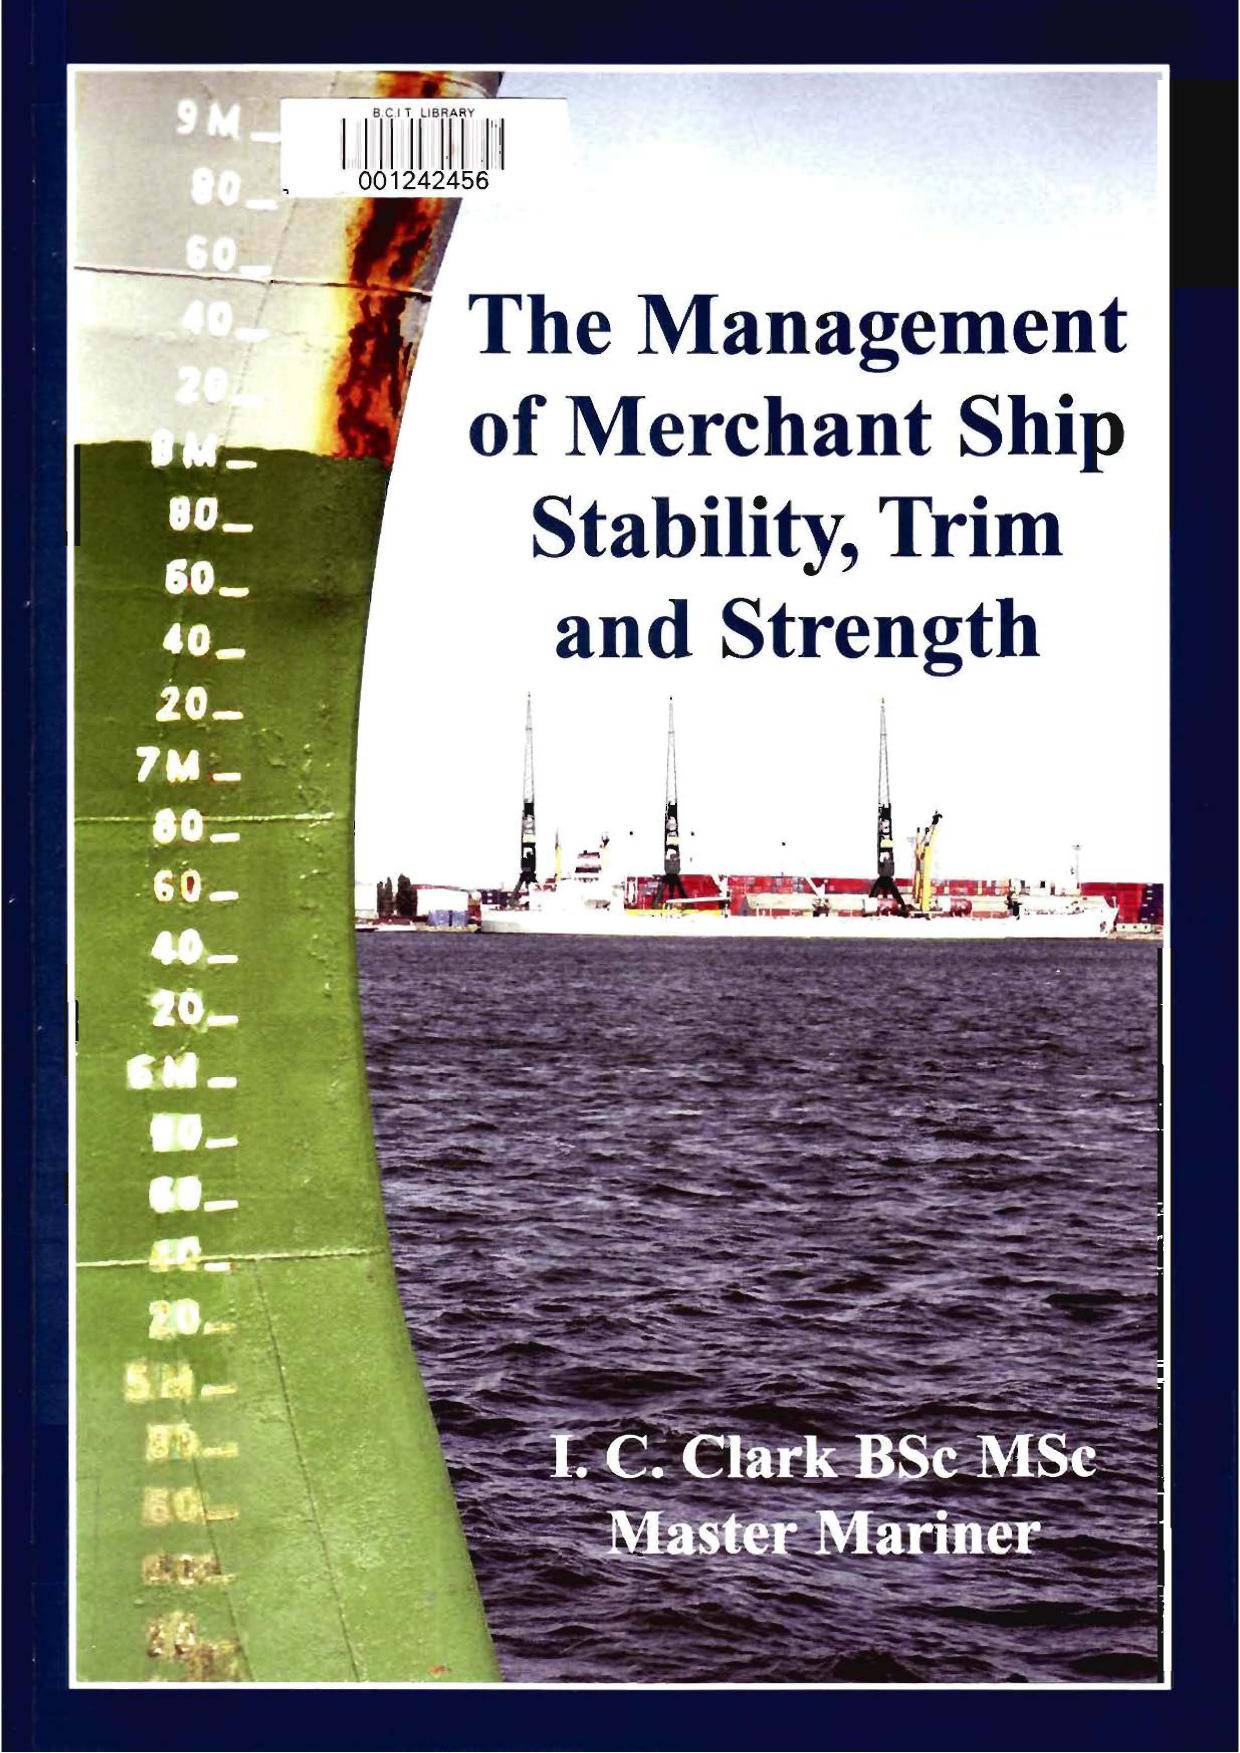 The Management of Merchant Ship Stability, Trim and Strength